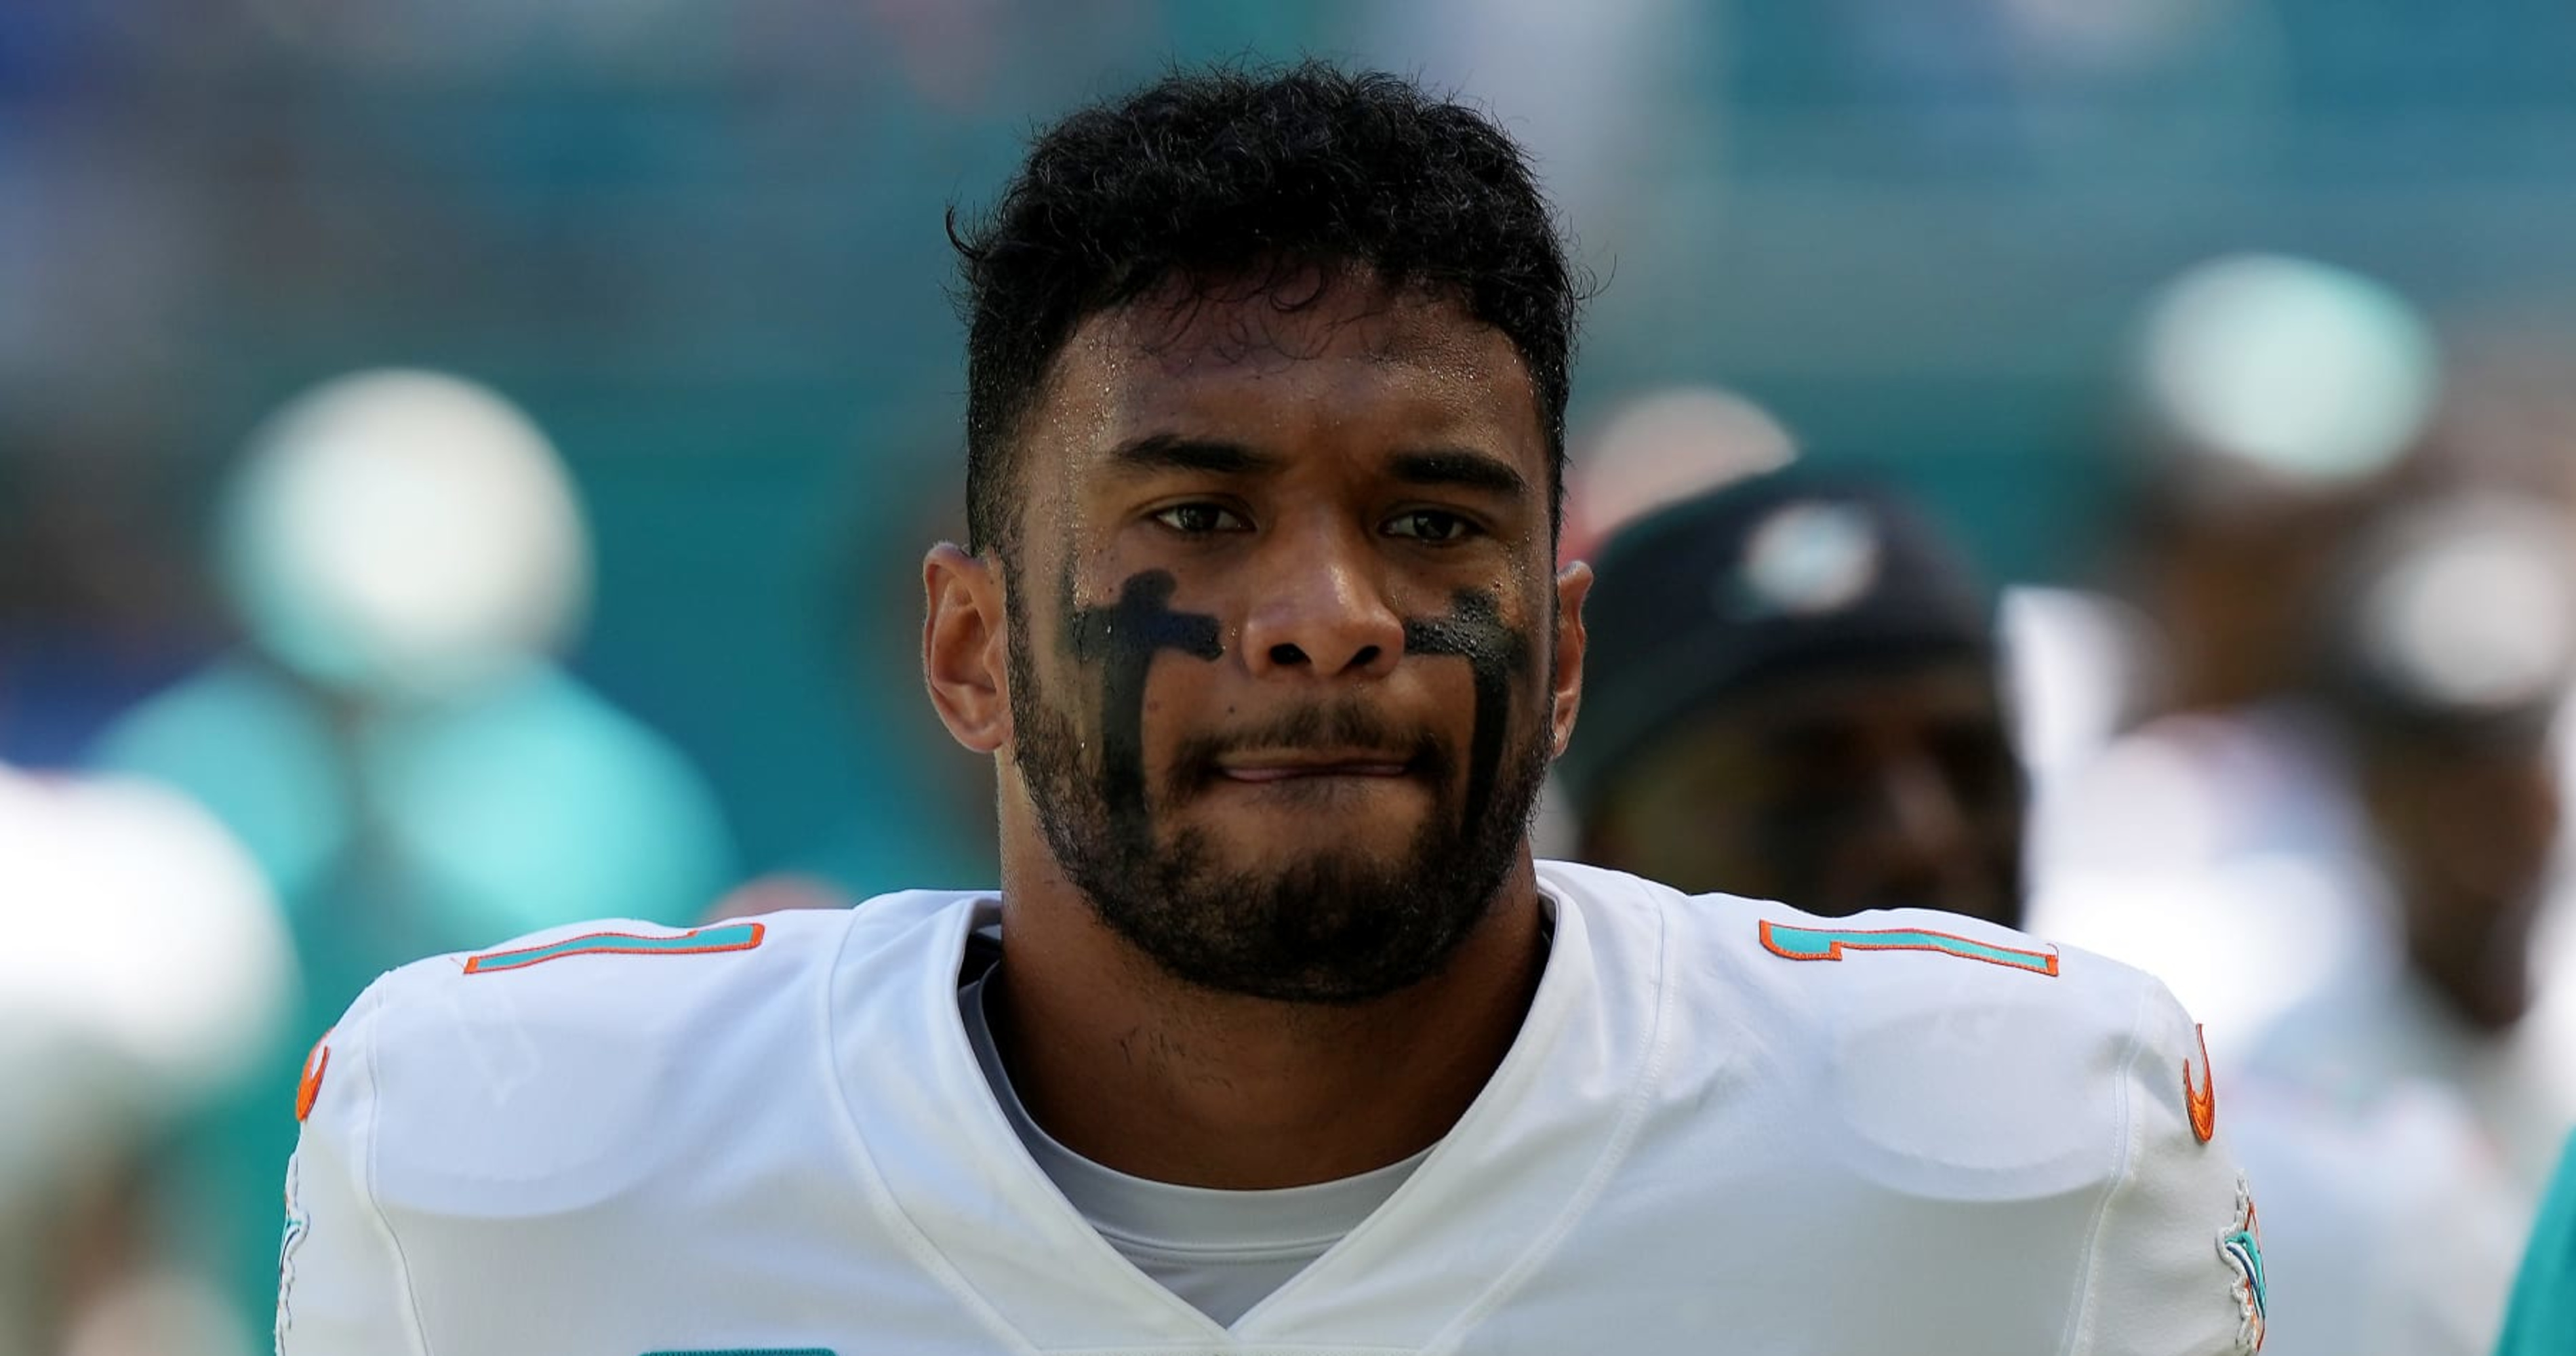 Dolphins QB Tua Tagovailoa reentering Bills game after scary head injury  prompts investigation by NFLPA, public outcry